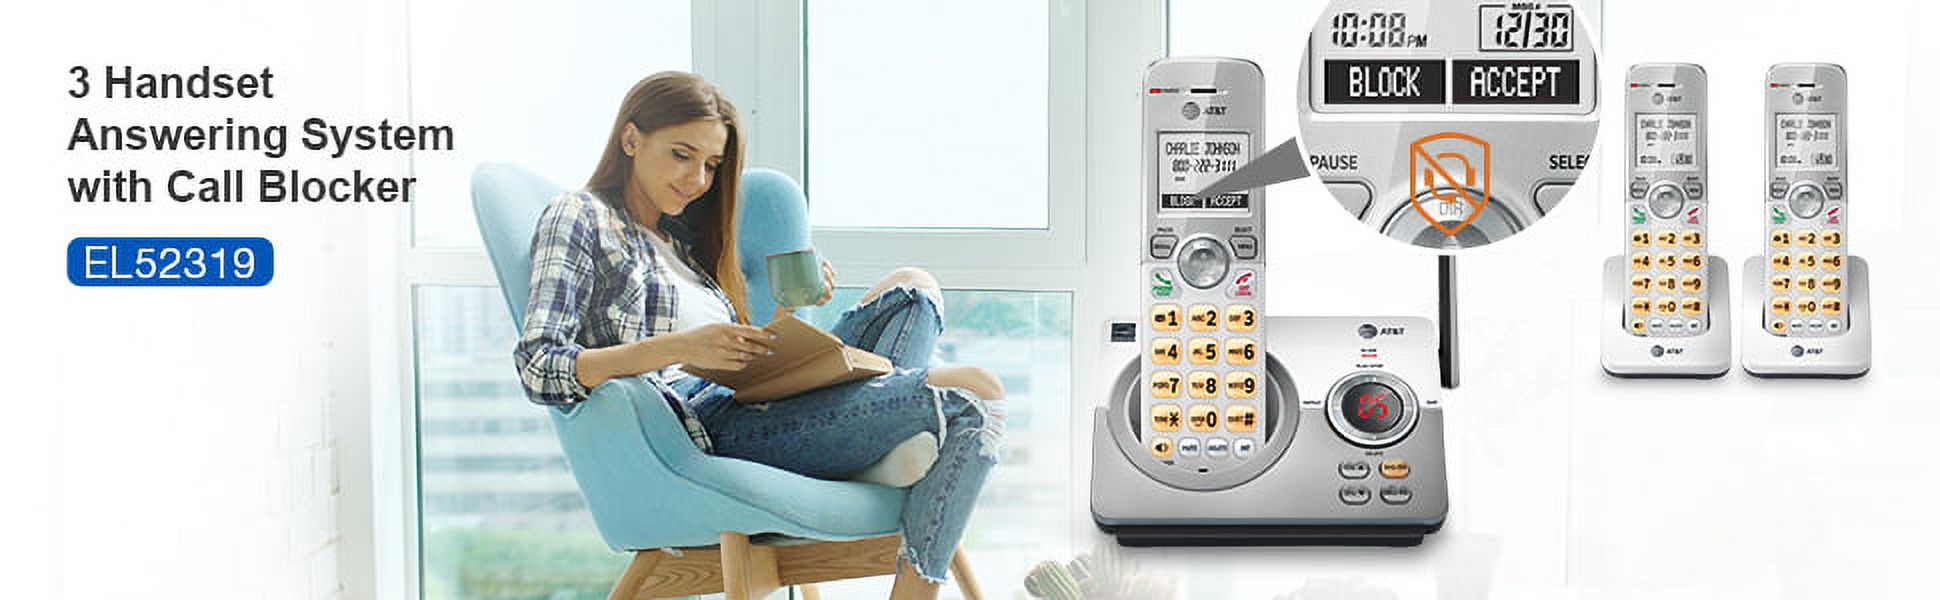 AT&T EL52319 Expandable Cordless Phone with Unsurpassed Range, Answering System and Caller ID, 3 Handsets, White/Silver - image 2 of 10